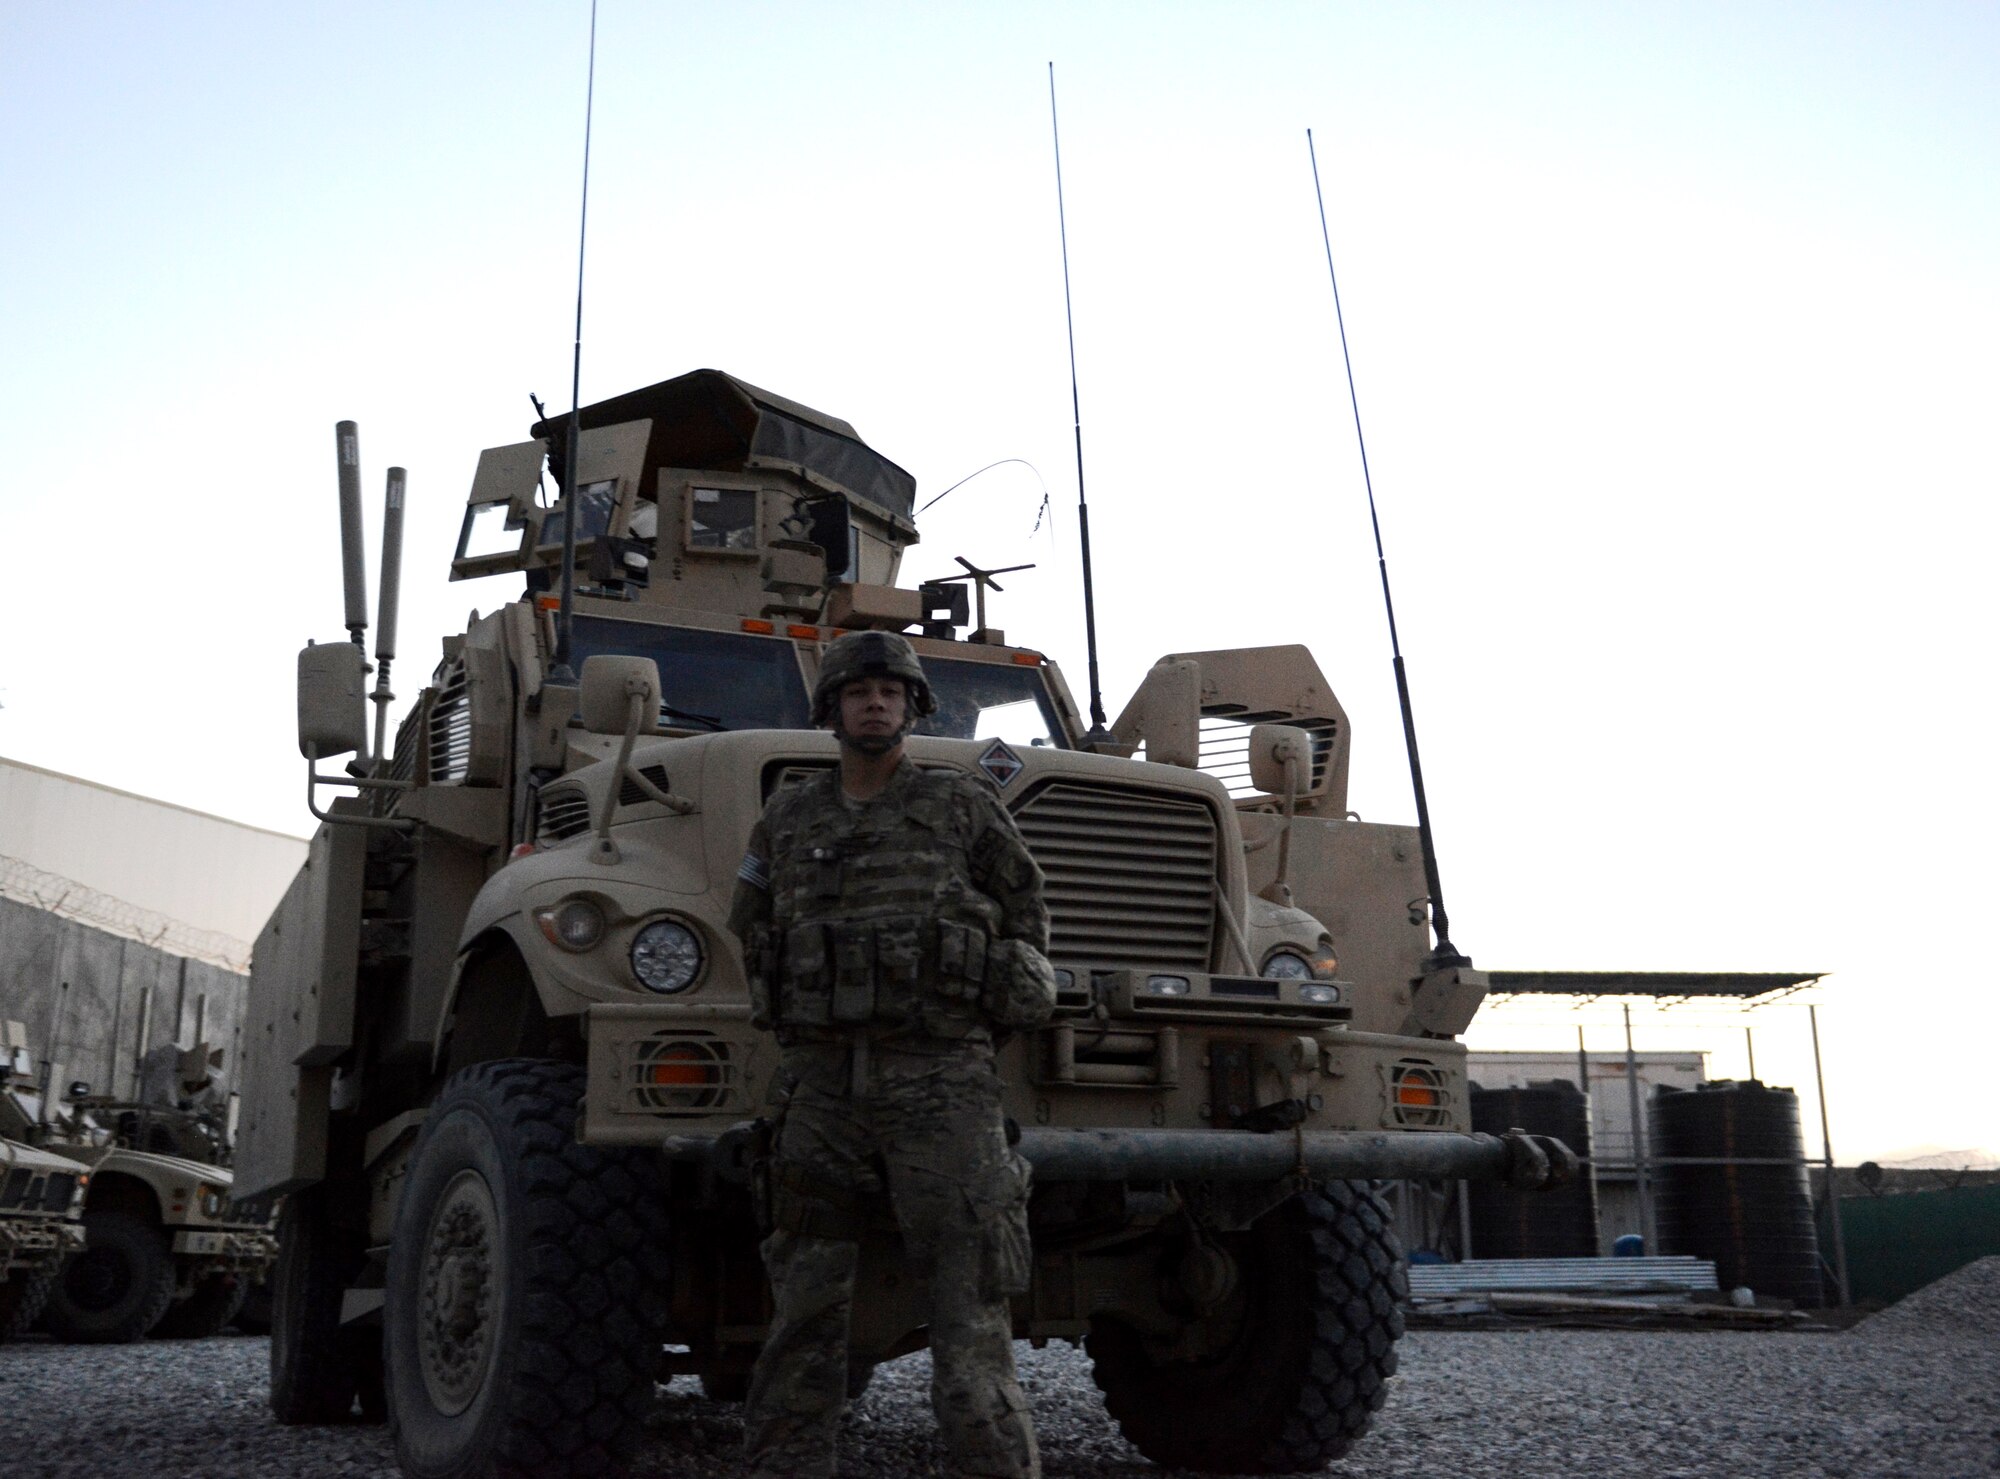 Senior Airman Julian Rangel stands by one of the mine-resistant ambush-protected vehicles that two Air Force quick reaction forces used while defending a forward operating base from a Taliban attack July 17 near Kabul Airport and Afghan air force base, Afghanistan. Rangel, who was asleep at the time the attack began, responded to the fight in shorts, t-shirt and tennis shoes under his body armor. He served as a gunner on the vehicle and laid down about 400 rounds of suppressive fire with an M240B medium machine gun during the more than four-hour firefight. (U.S. Air Force photo/Senior Master Sgt. Mike Hammond)